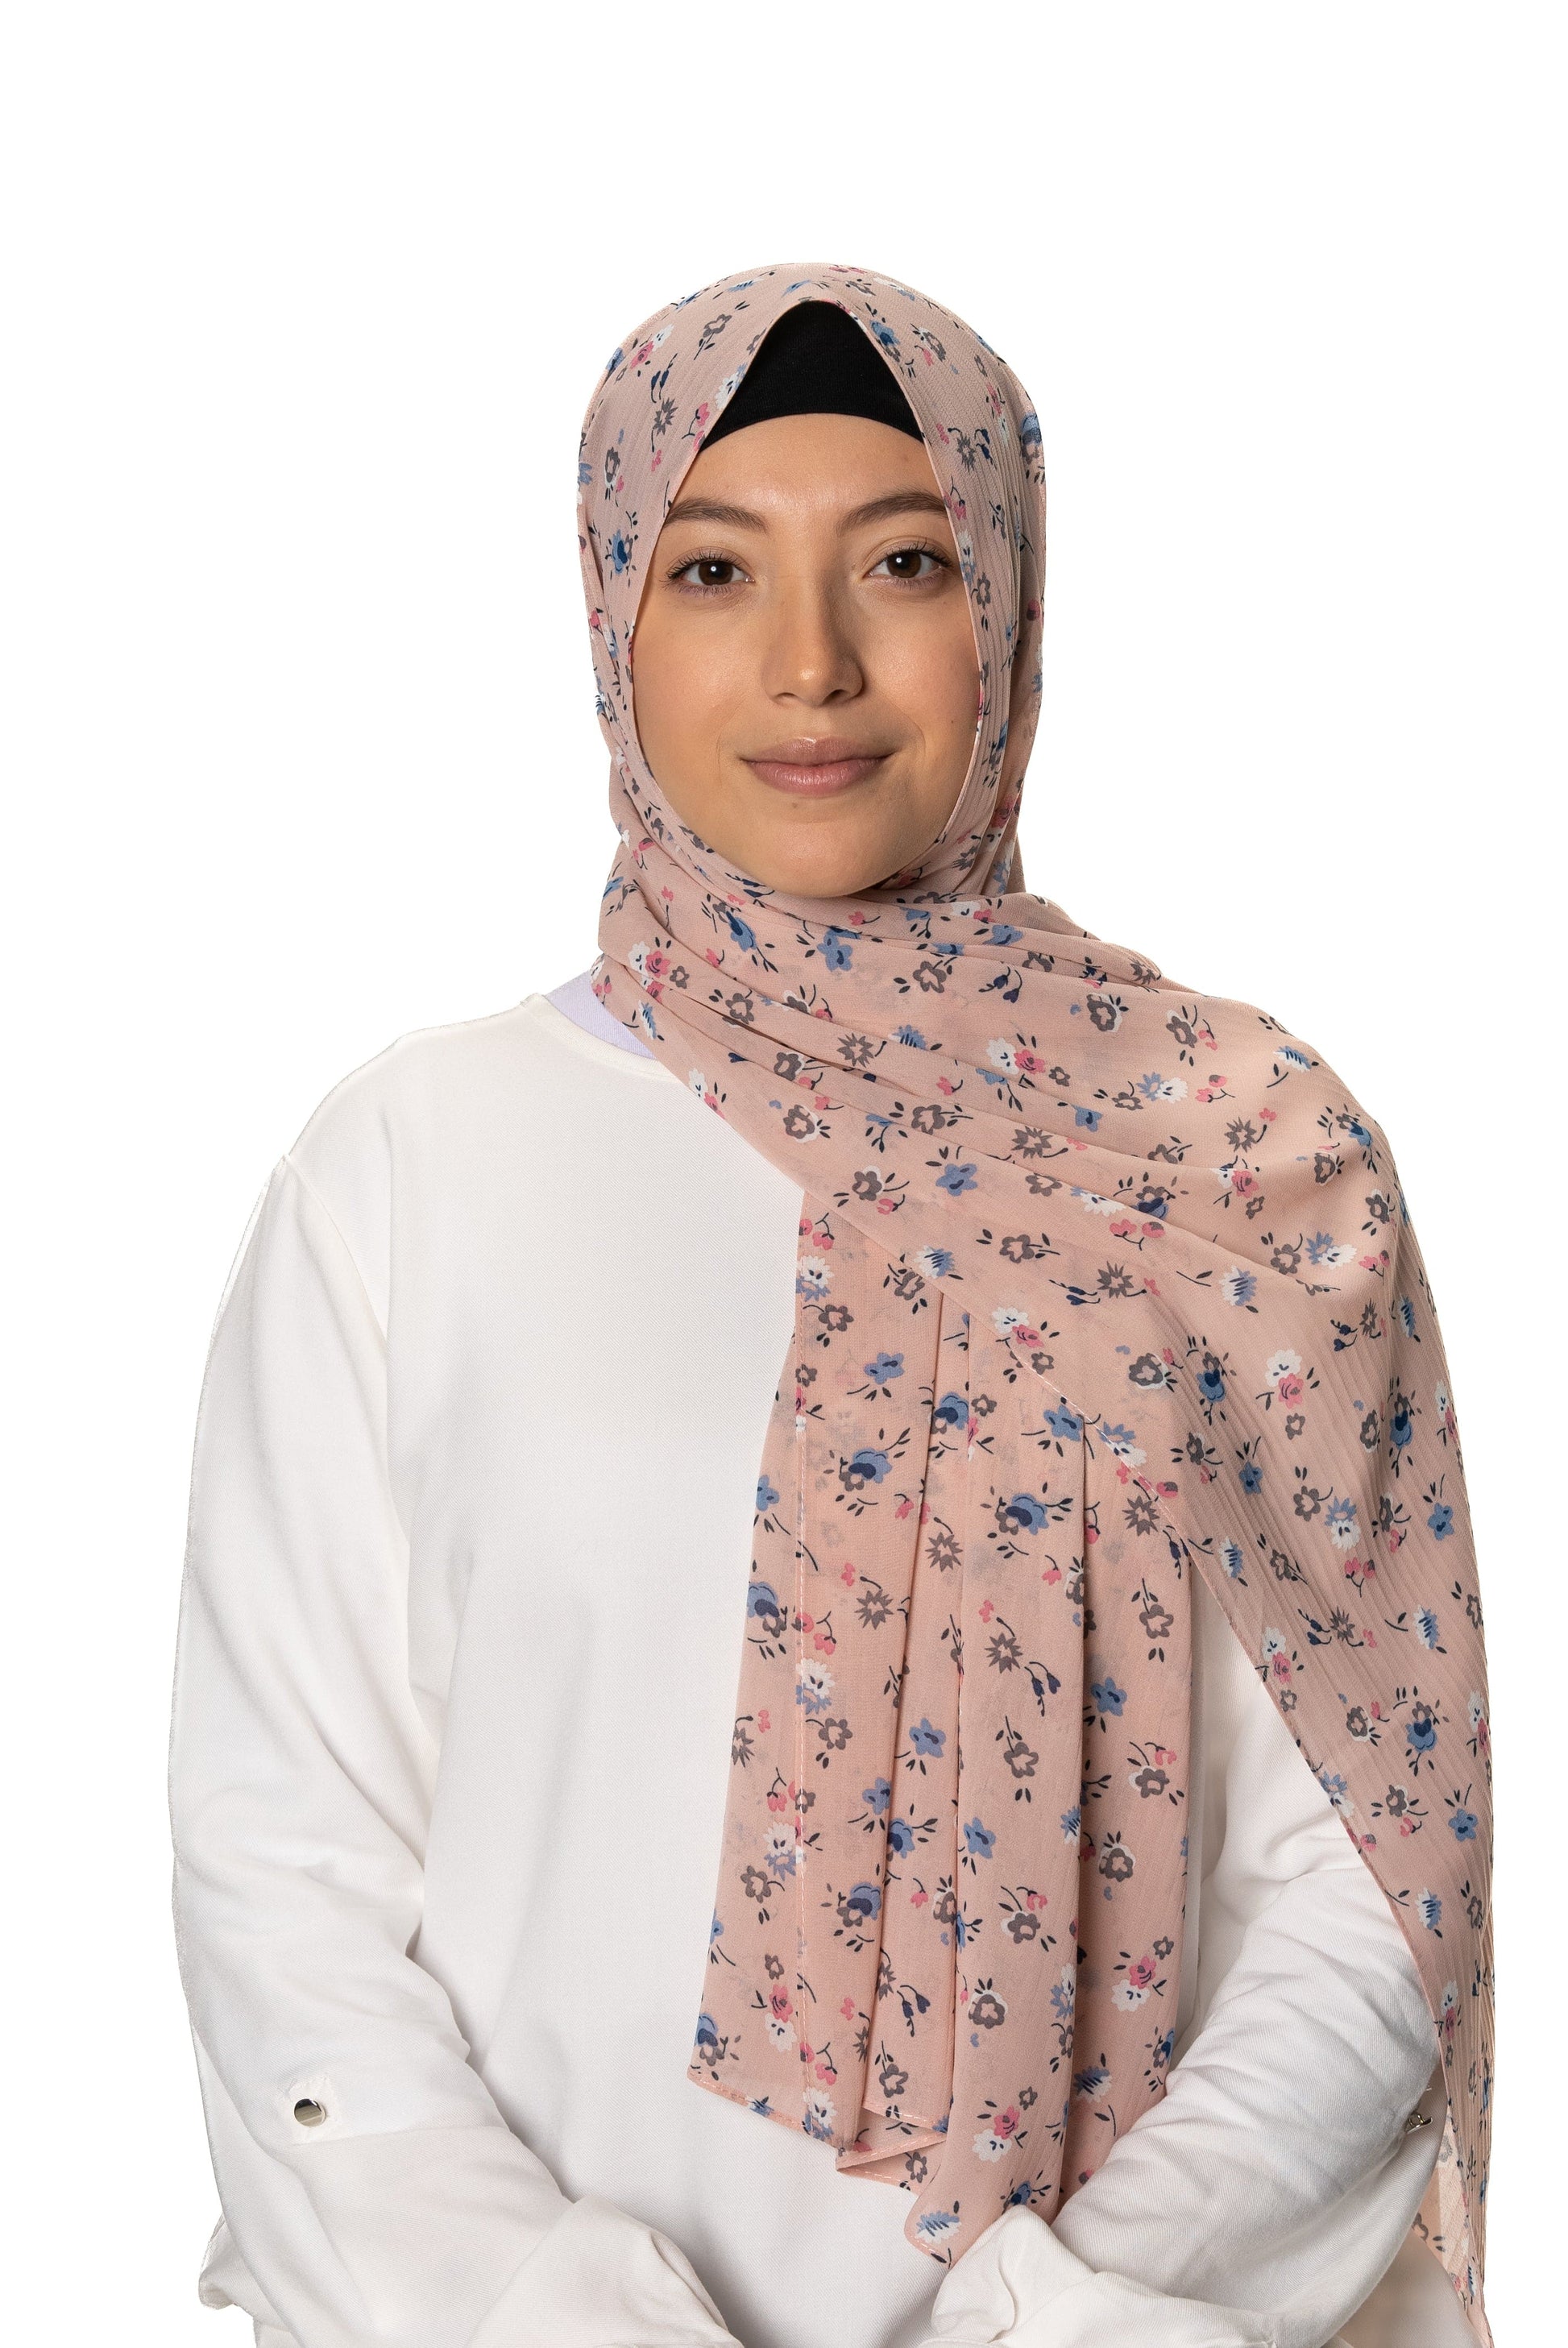 Jolie Nisa Hijab Soft Pink Experience Luxury and Comfort with Jolie Nisa Premium Crinkle Chiffon Hijab - Non-Slip, Elegant and Breathable Hijab for Women